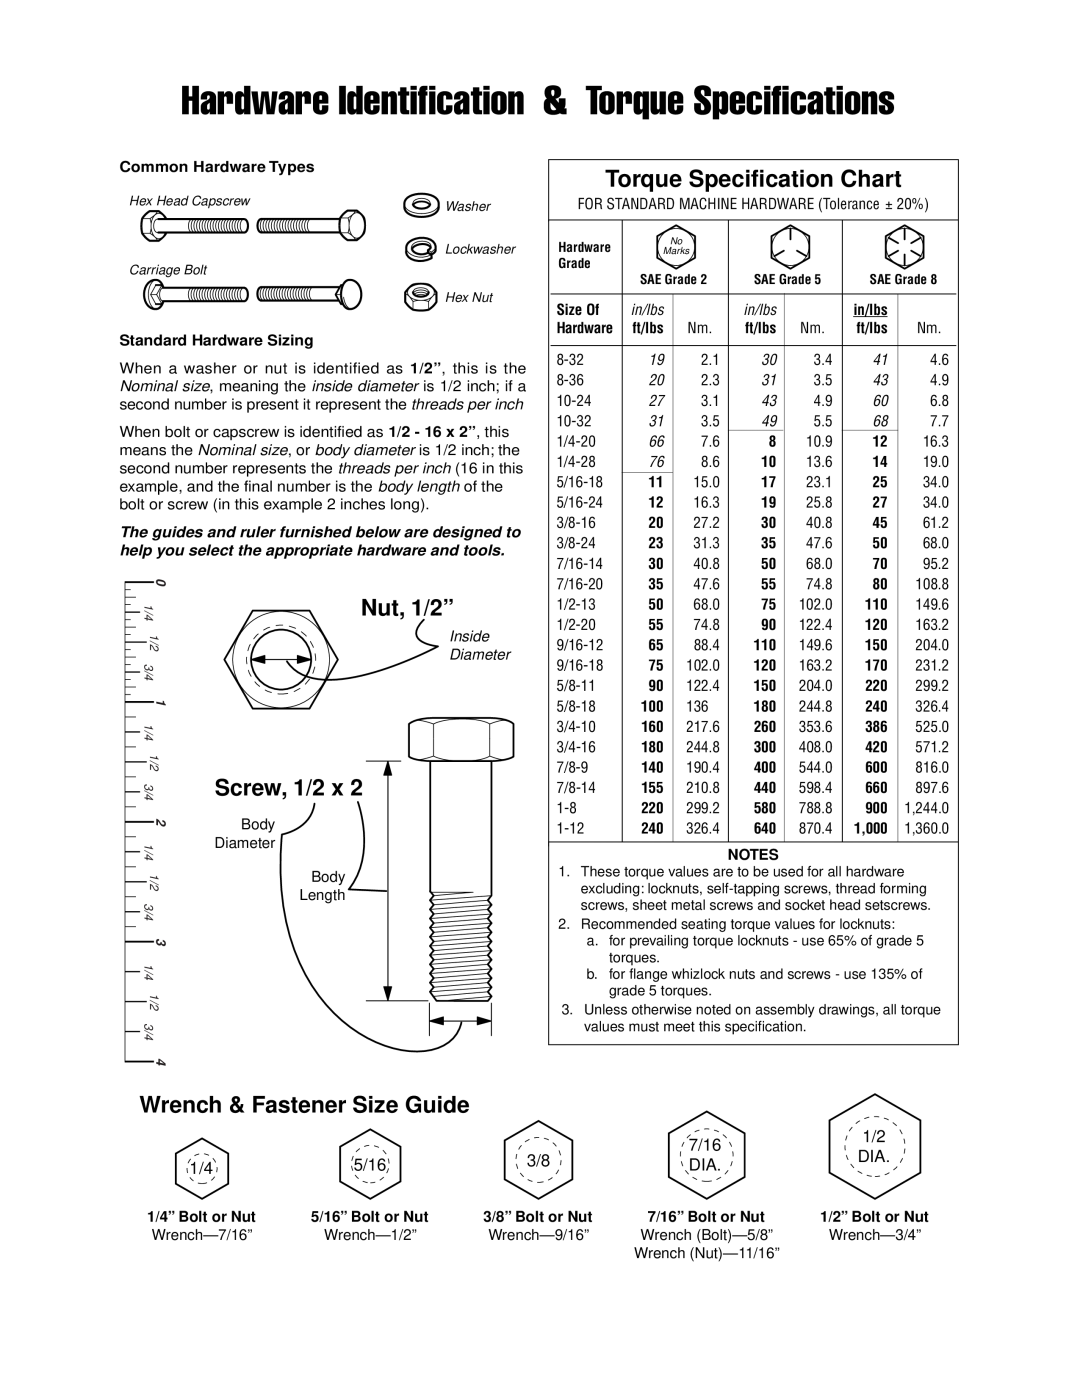 Simplicity 4WD Series Wrench & Fastener Size Guide, Hardware Identification & Torque Specifications, Nut, 1/2”, 7/16, 5/16 